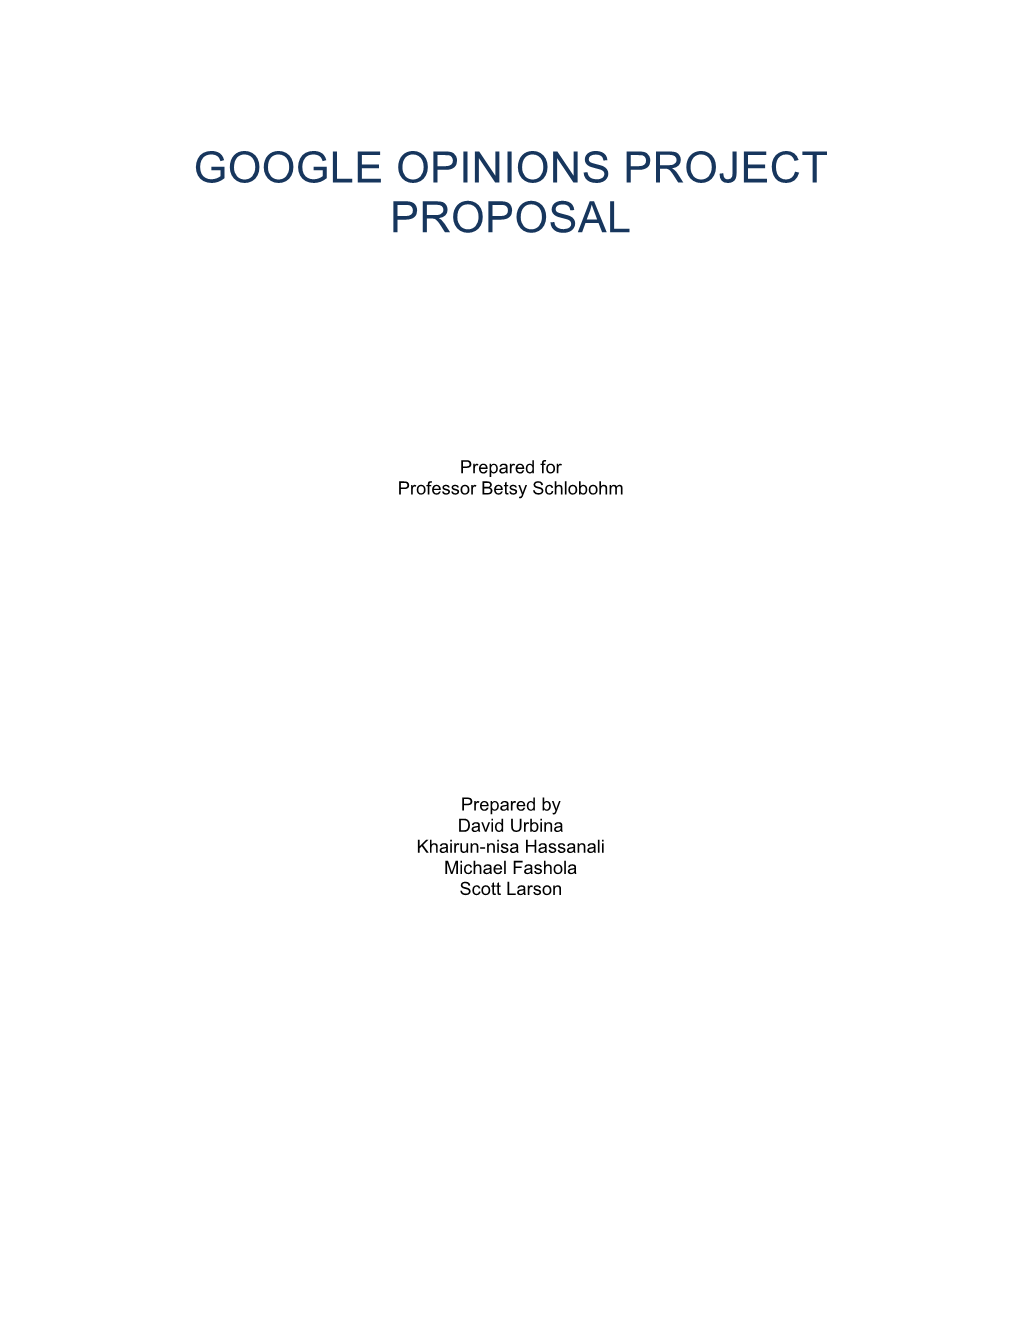 Google Opinions Project Proposal